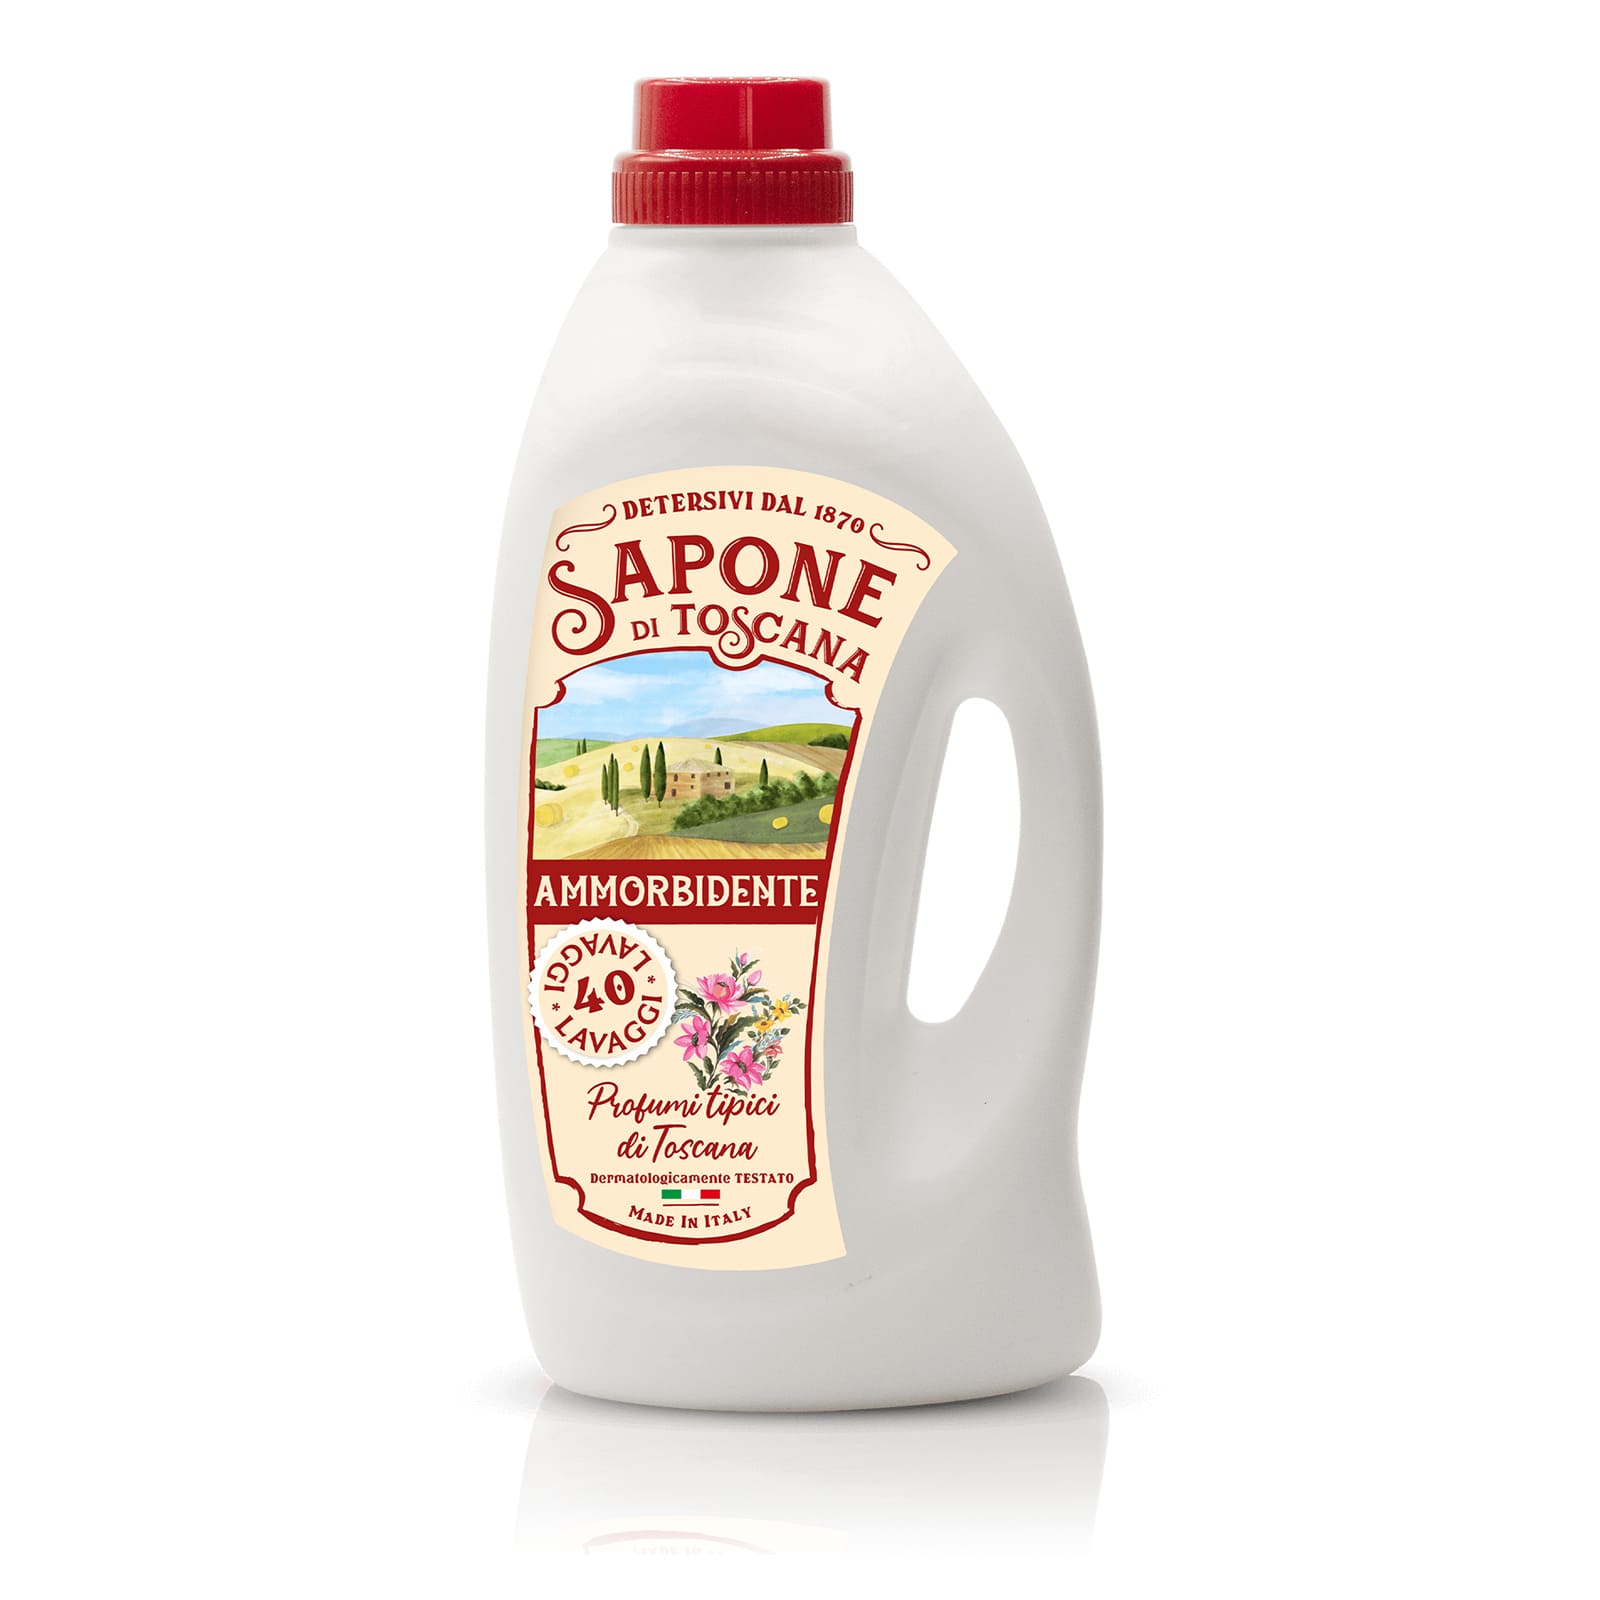 Fabric softener - Typical Tuscan scents